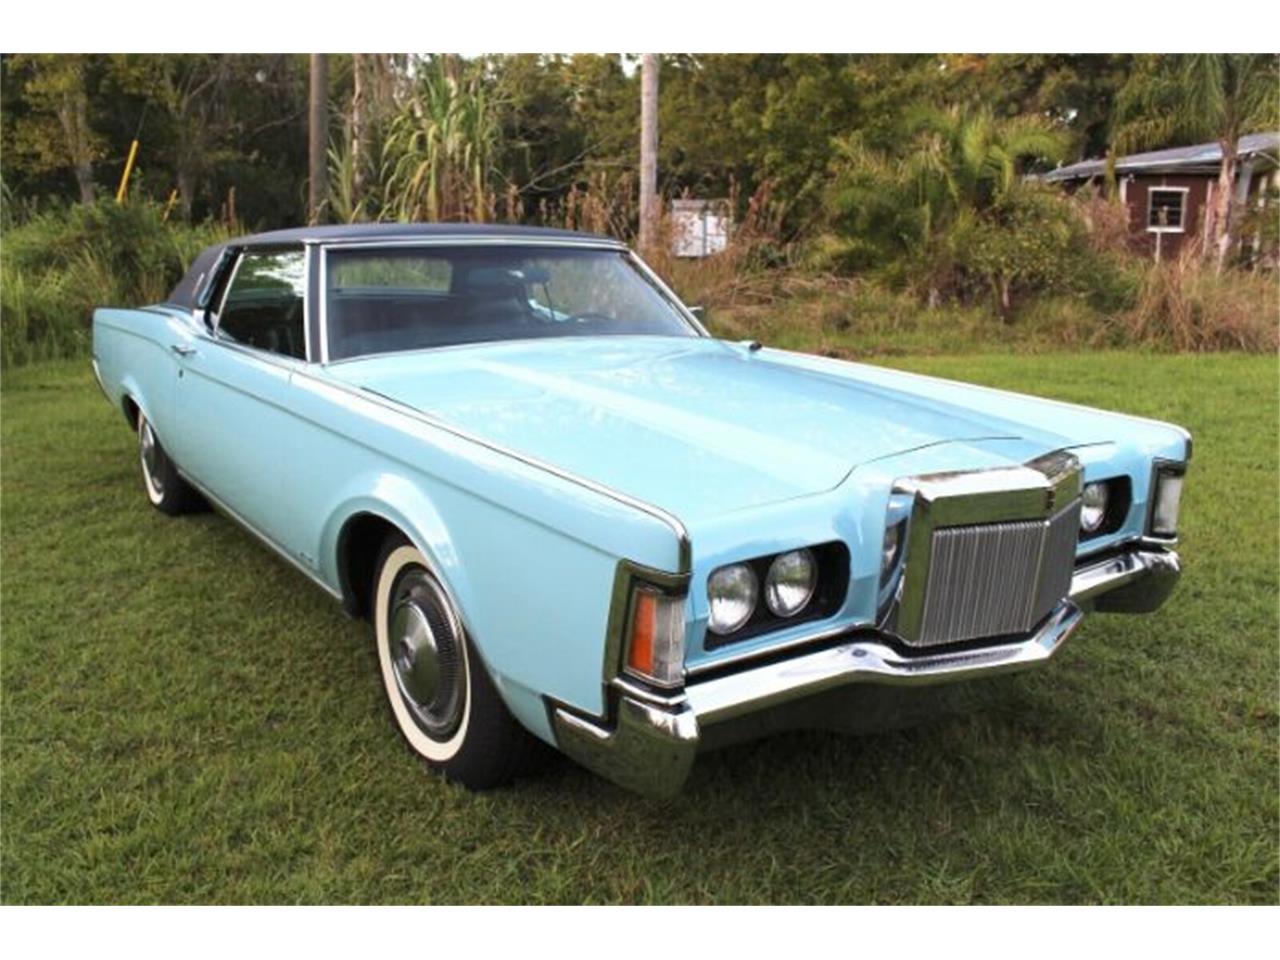 1970 Lincoln Continental for Sale | ClassicCars.com | CC ...